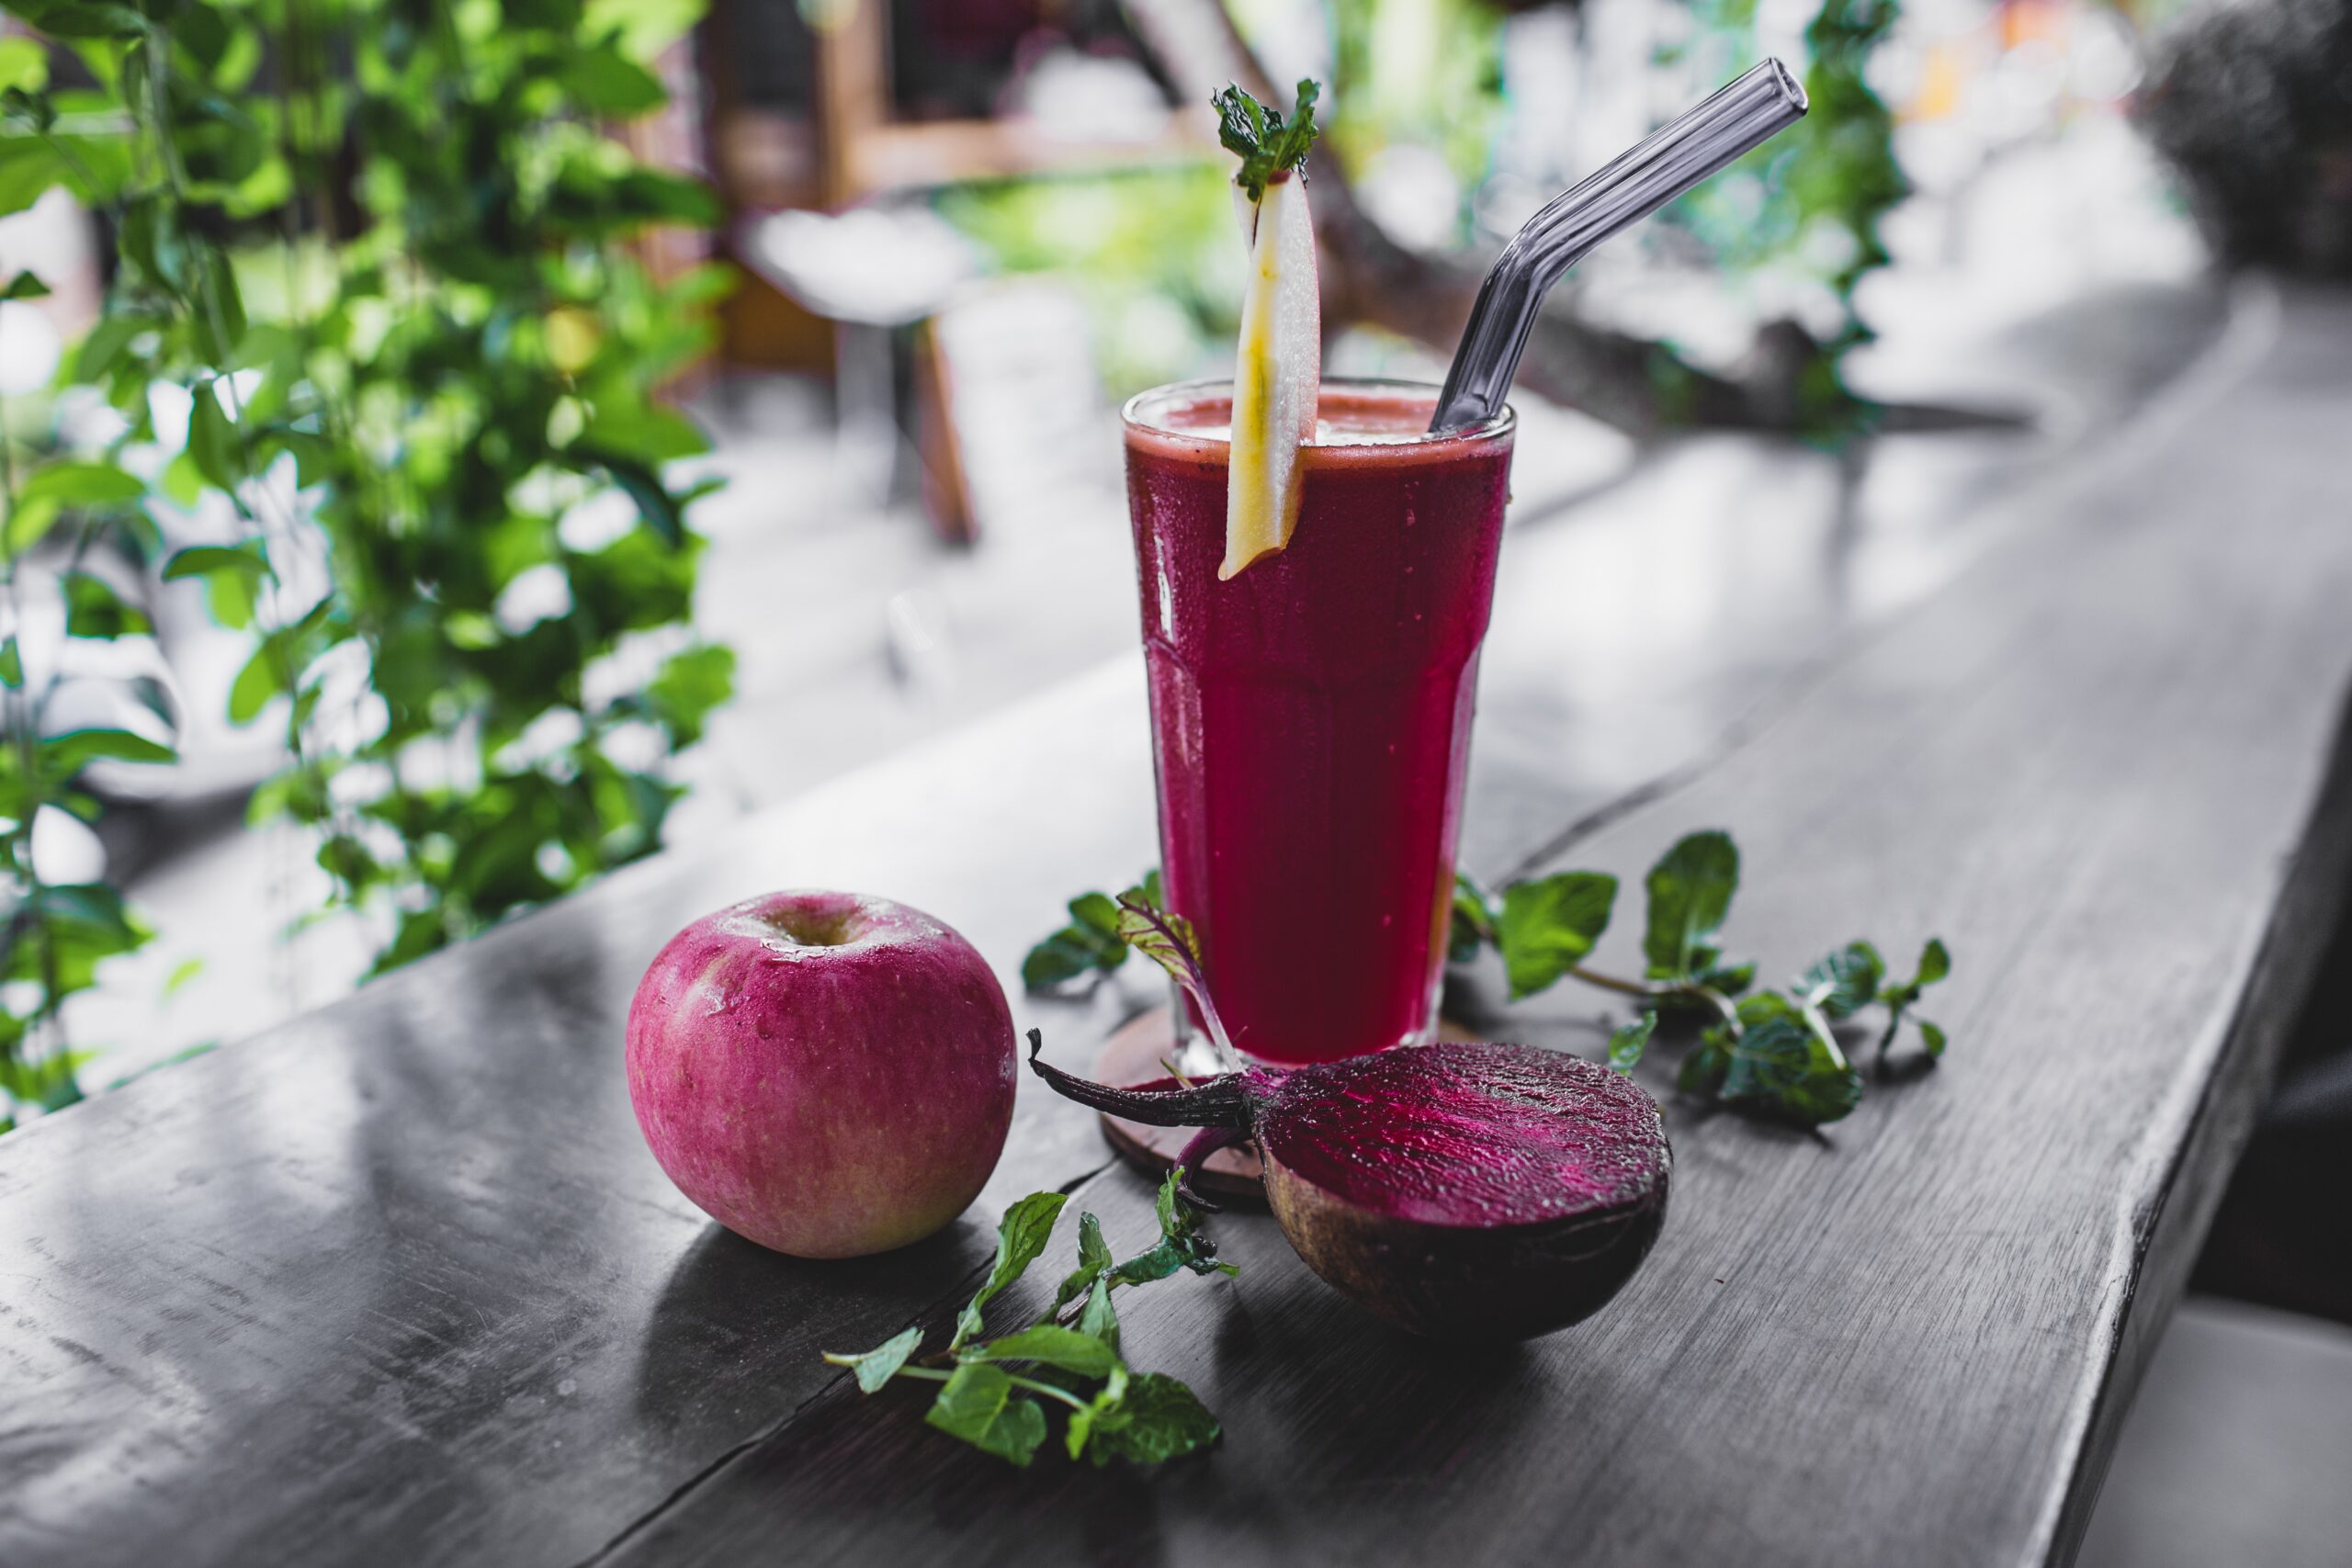 Cheers To Goodness: "5 Easy Homemade Fruit Juice Recipes For A Healthy Life”